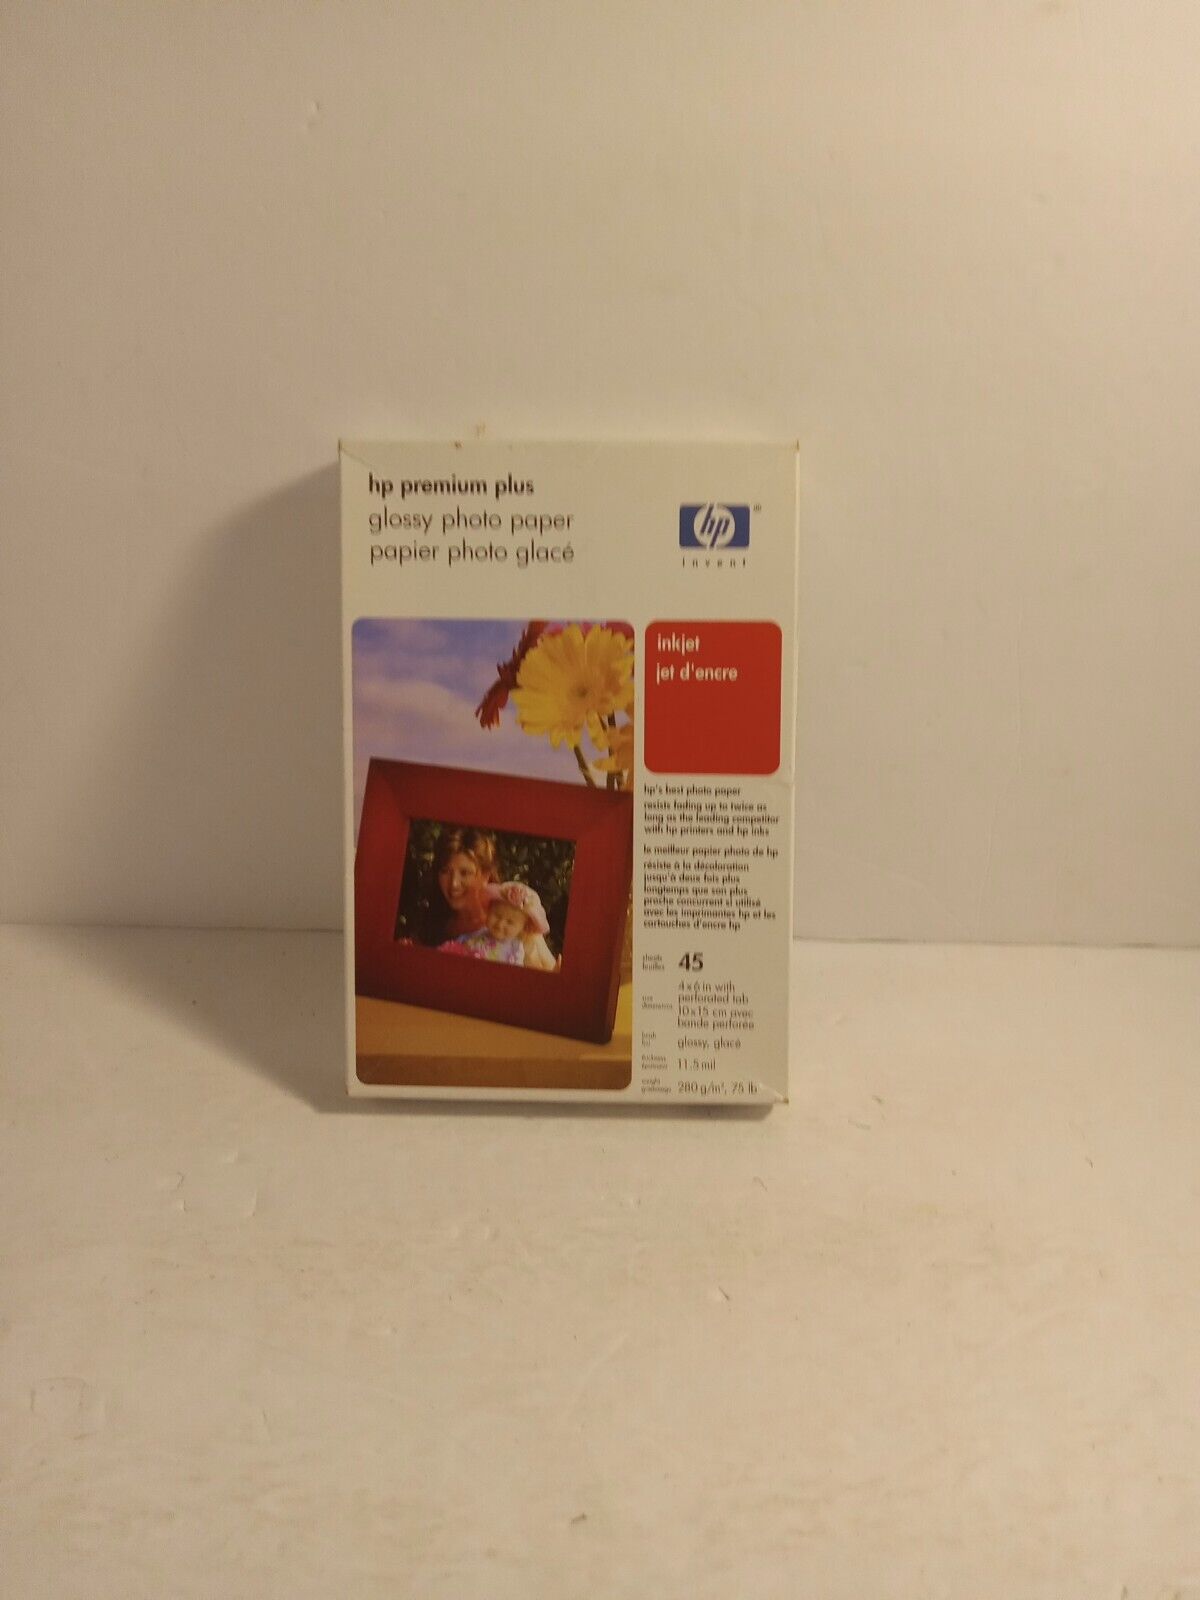 Hp Premium Plus Glossy Photo Paper Q5519A 4x6 inch 45 Sheets NEW, UNOPENED 